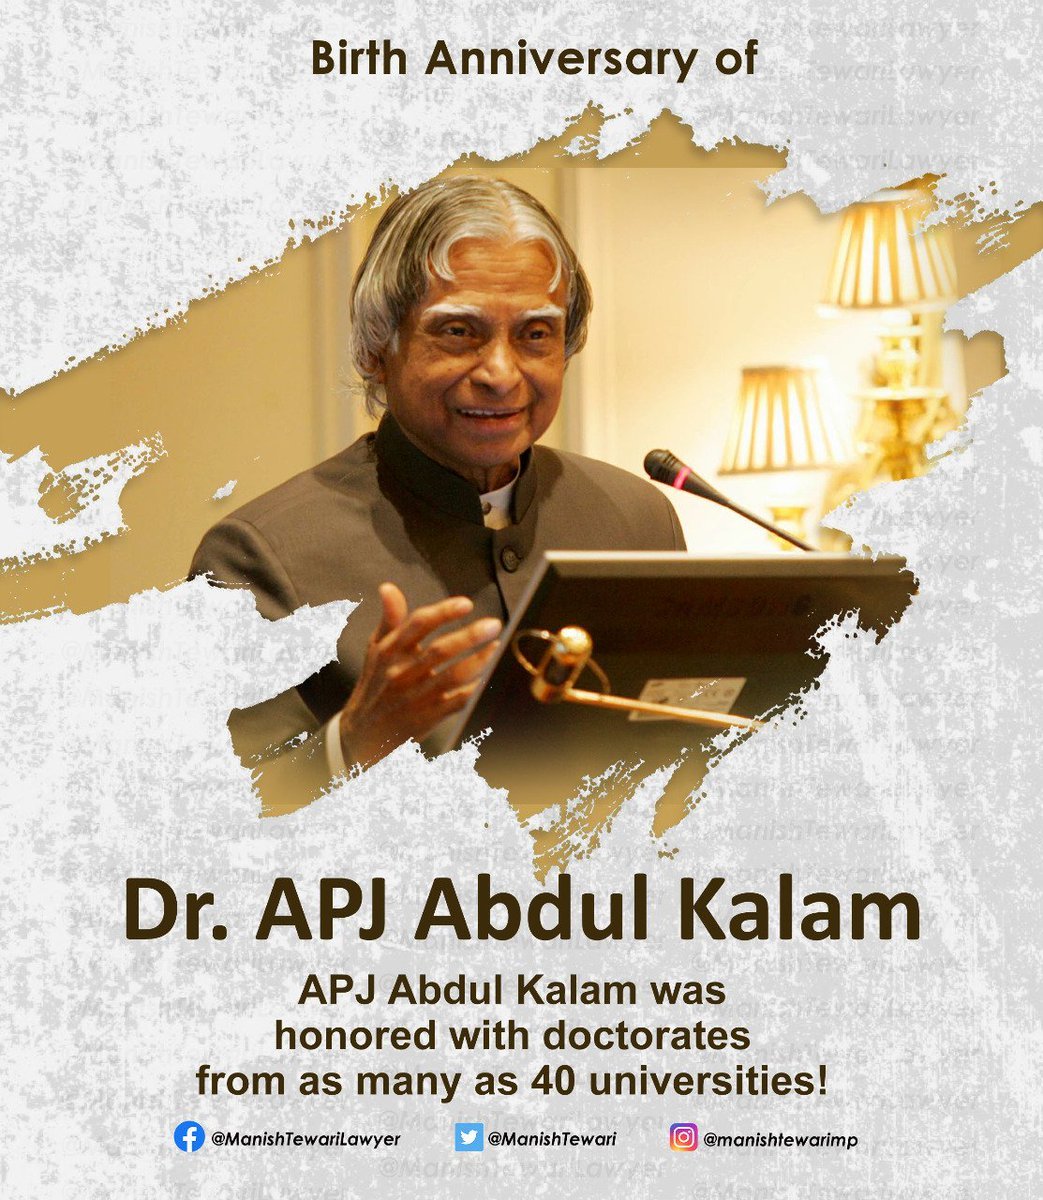 Tributes to the great scientist and former President of India Dr. APJ Abdul Kalam on his birth anniversary!  May Allah grant him the highest place in Jannatul Fidosh.
#APJAbdulKalam #kalam #Science #MissileManOfIndia #missile